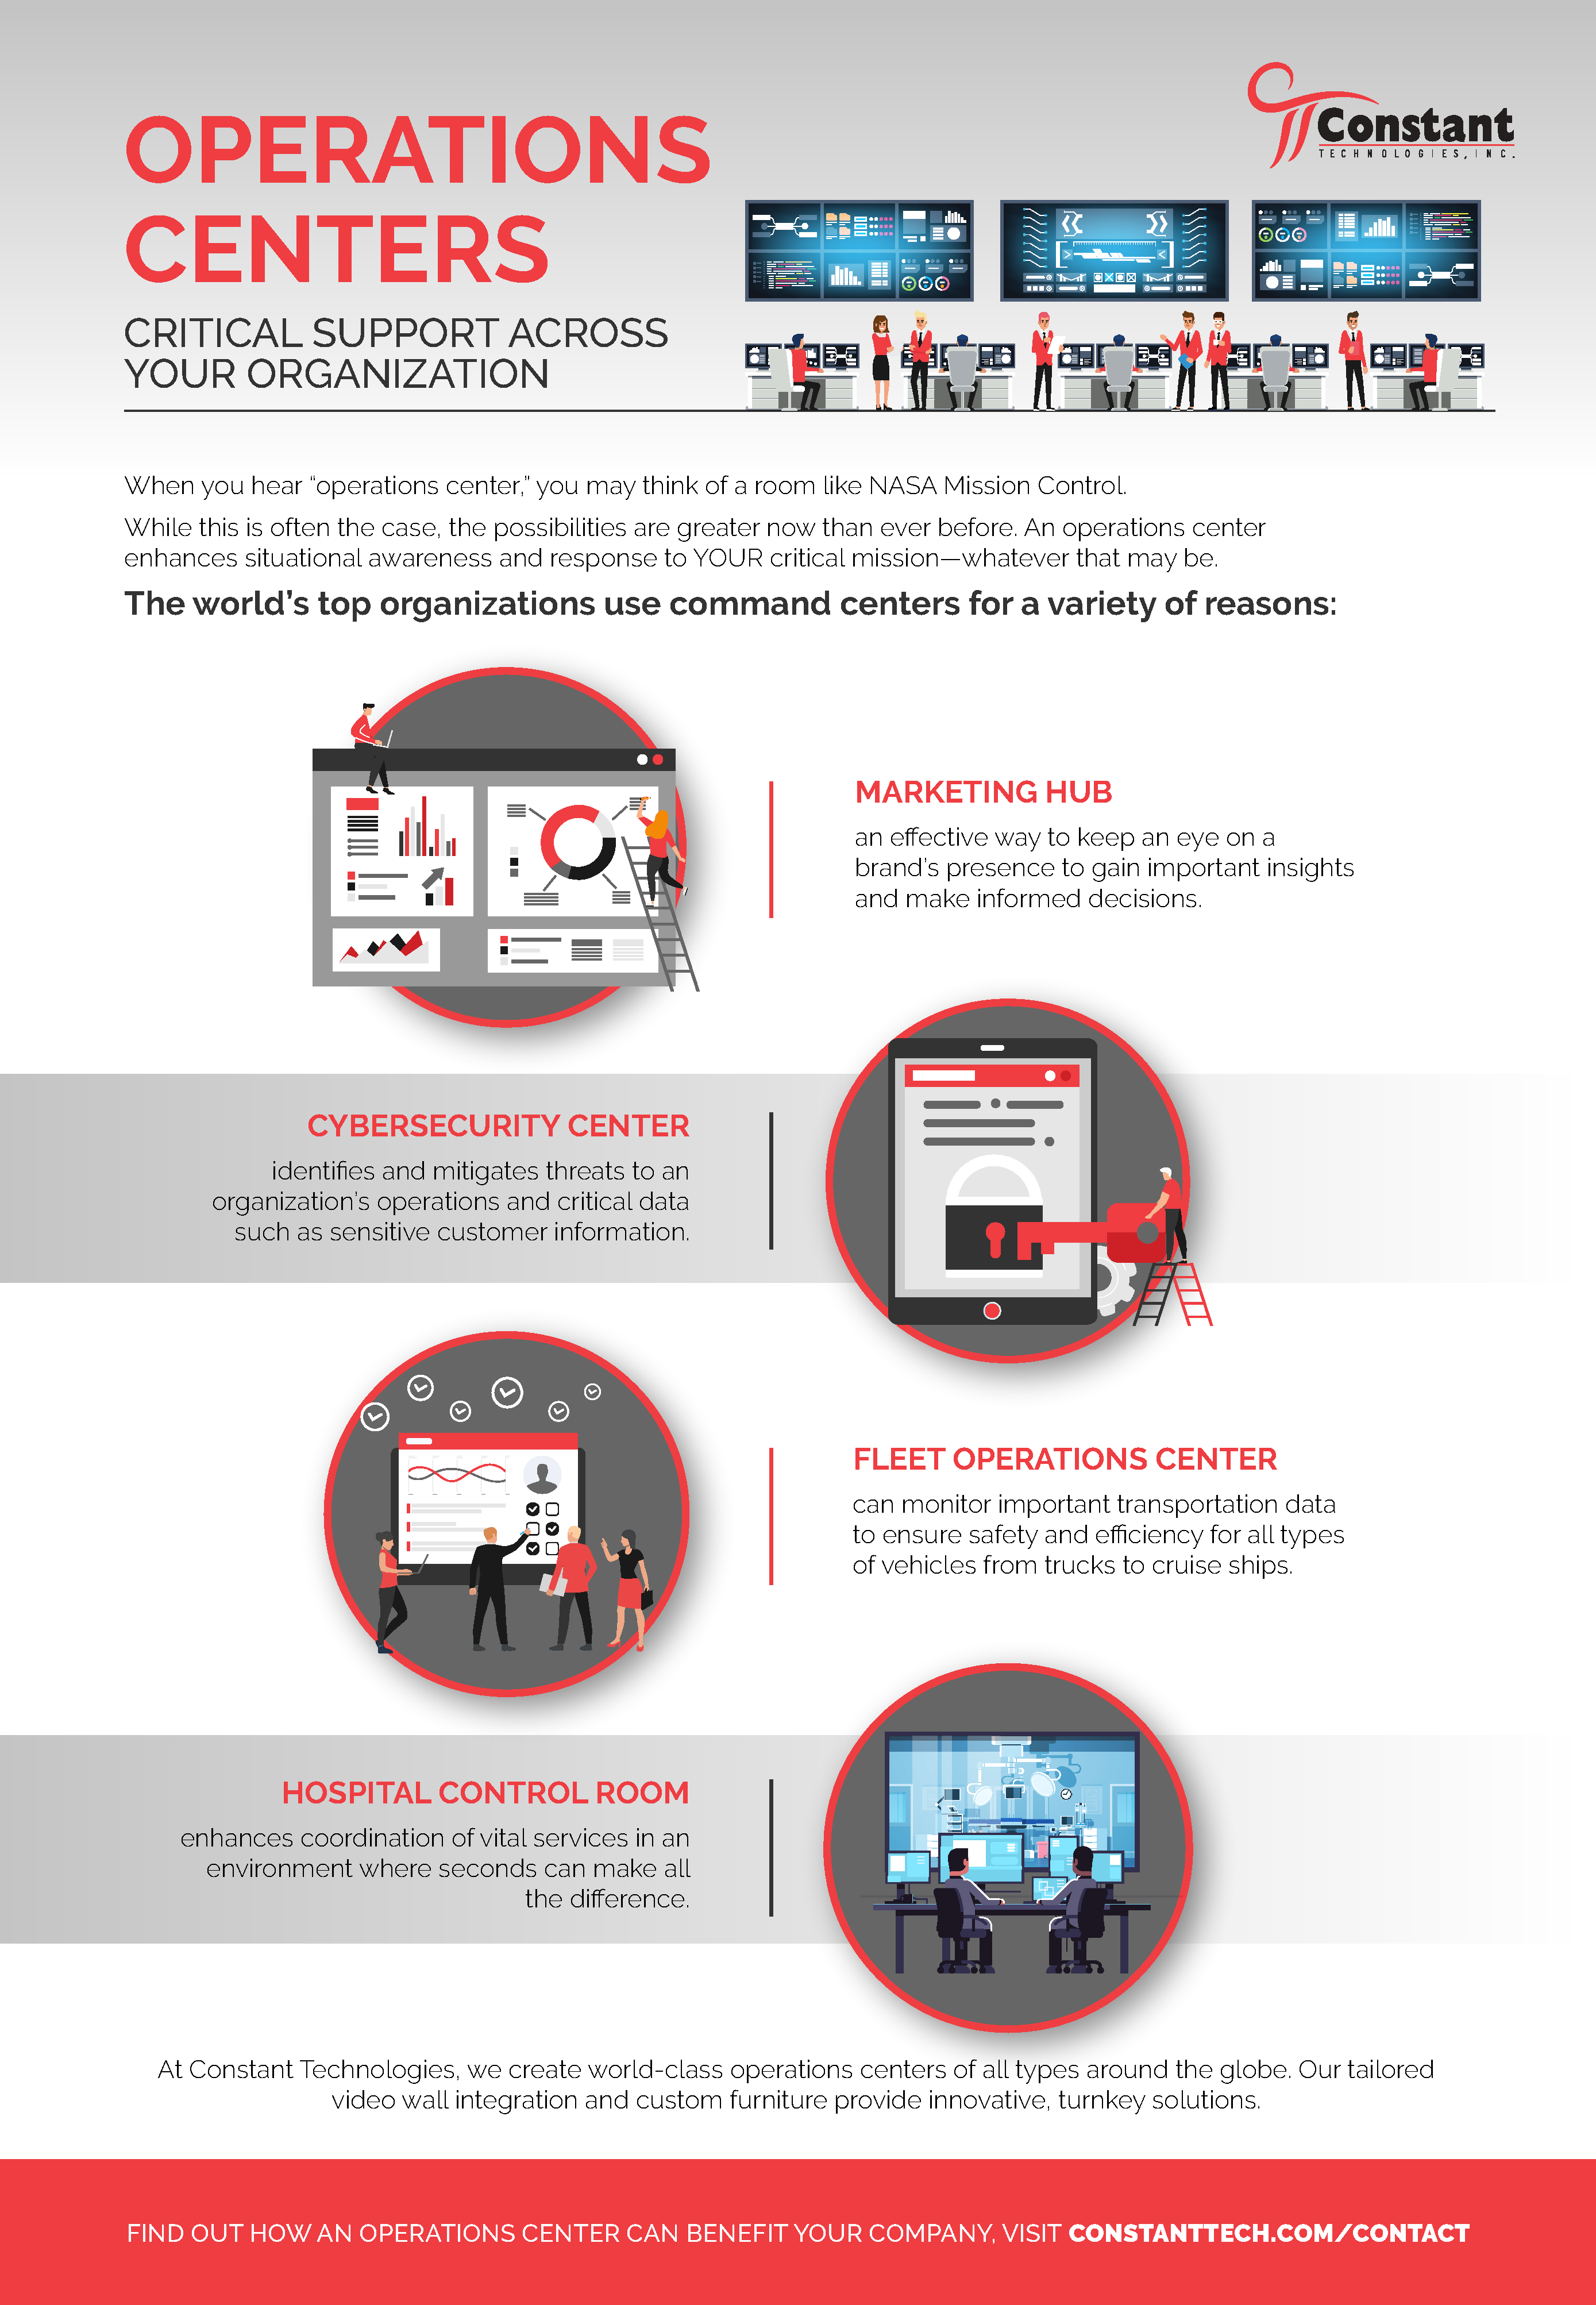 infographic detailing 4 kinds of command centers: marketing hubs, cybersecurity centers, fleet operations centers, and hospital control rooms